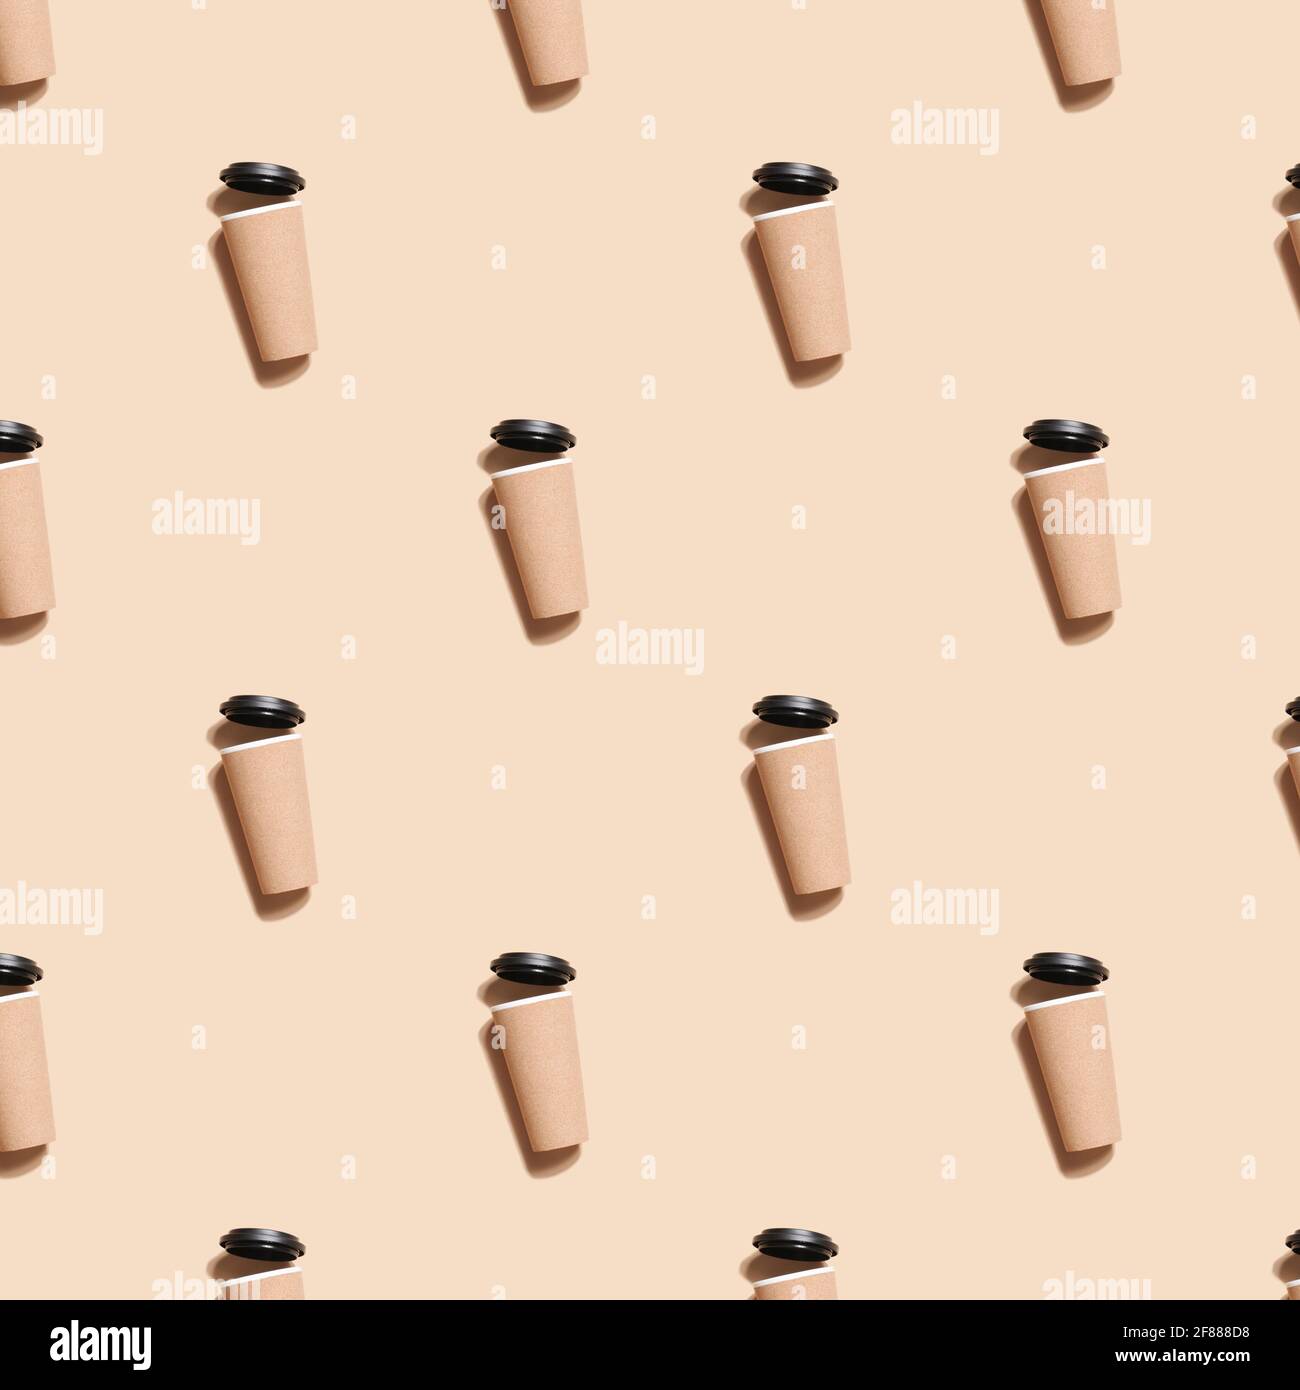 reusable eco coffee or tea cup pattern on beige background. Sustainable lifestyle. Eco friendly and Zero waste concept.Flat lay mock up. Stock Photo